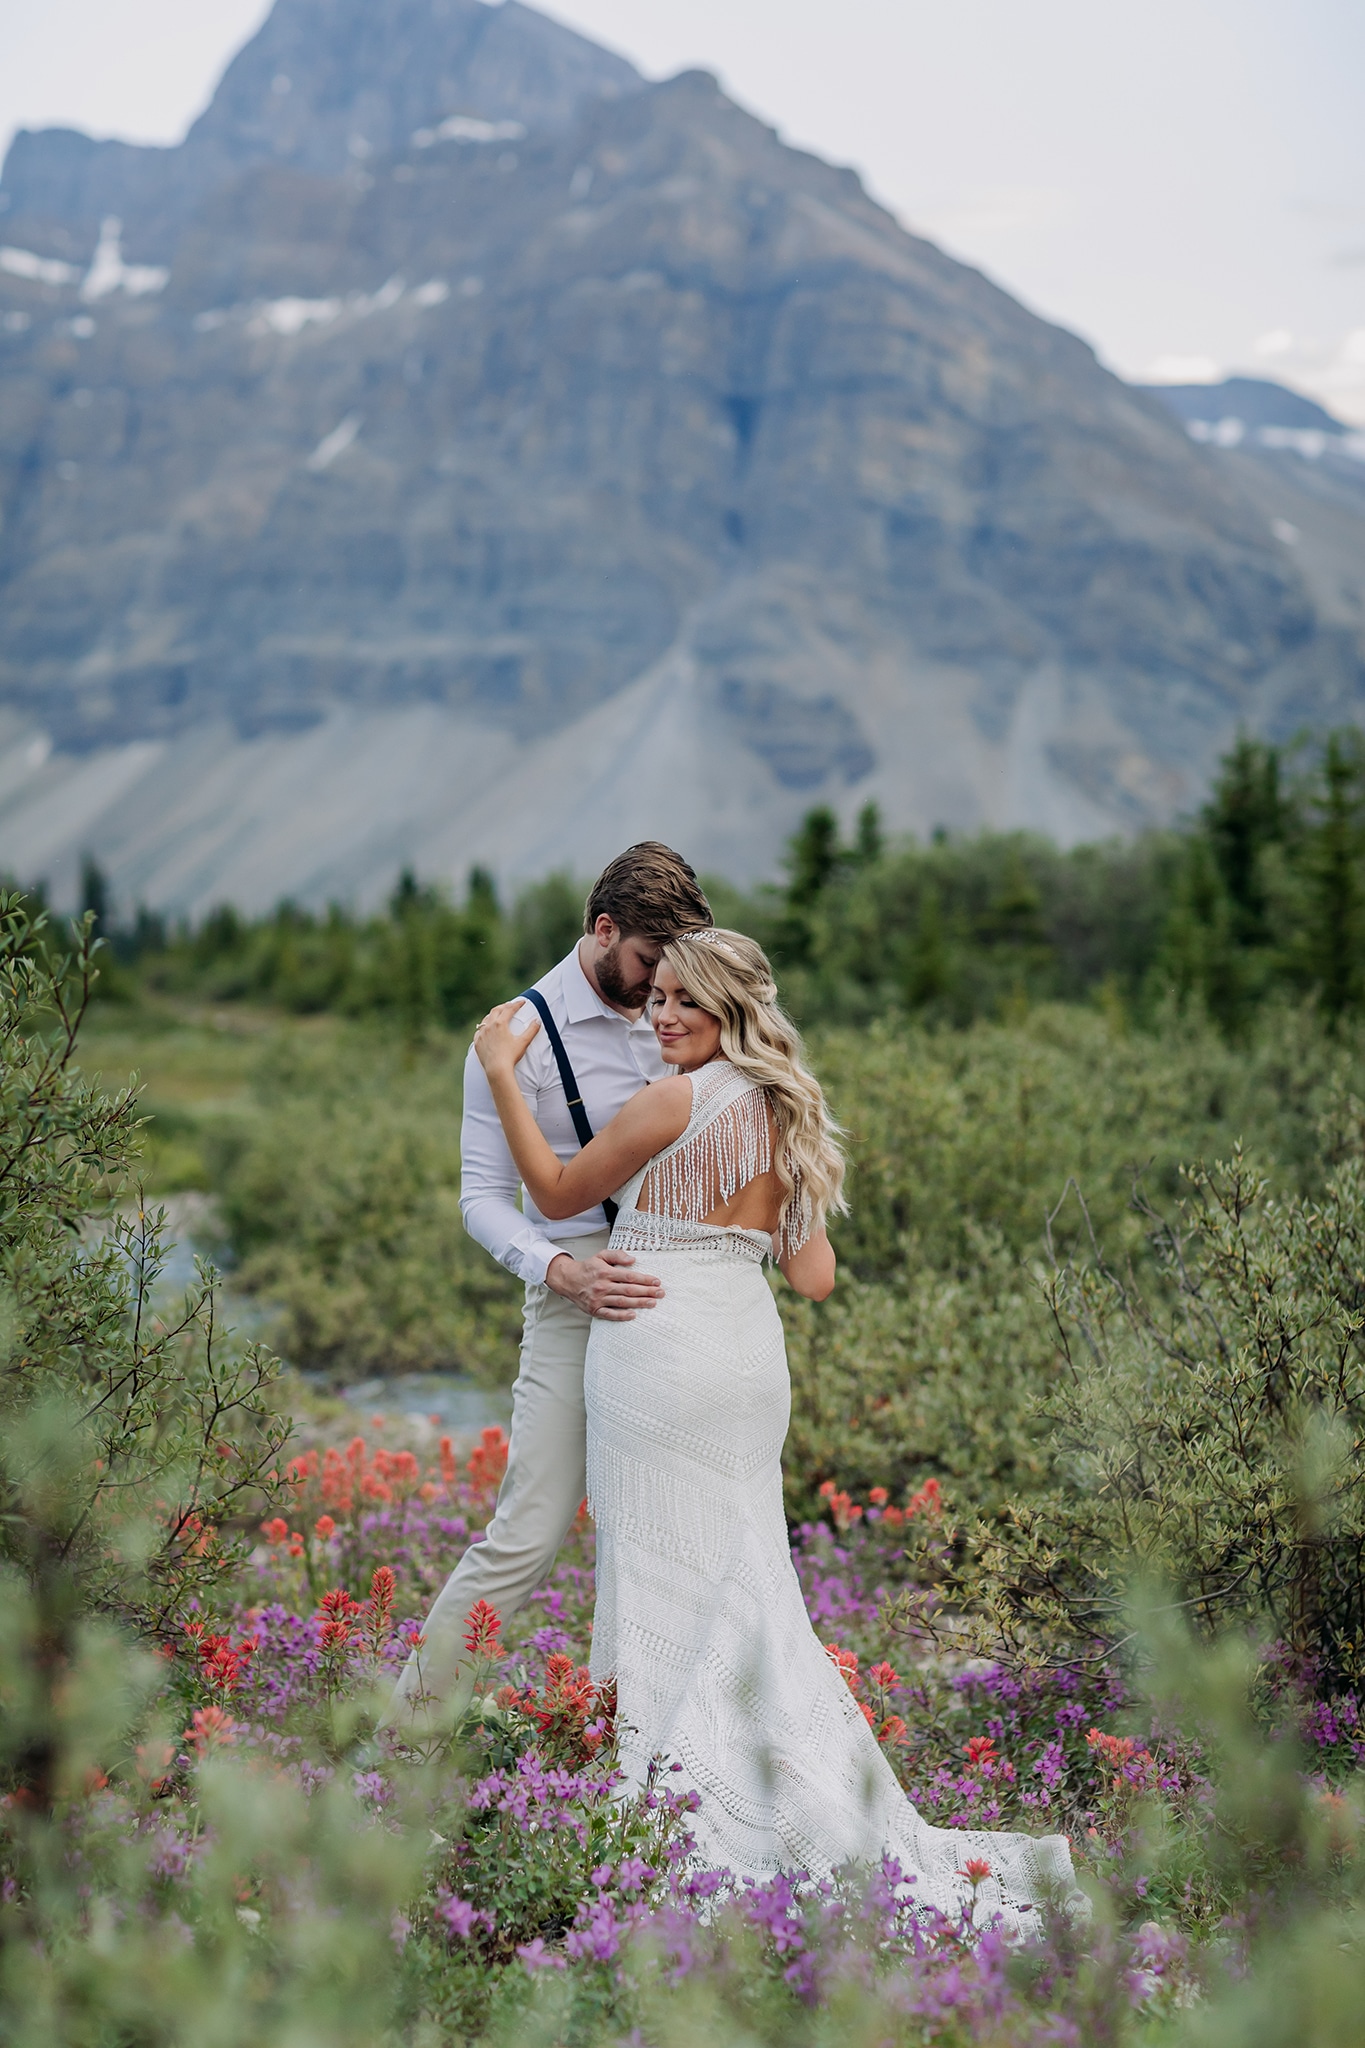 A Guide to Eloping in the Canadian Rockies | Mountain Wedding photographed by ENV Photography | boho mountain elopement in wildflowers on icefields parkway